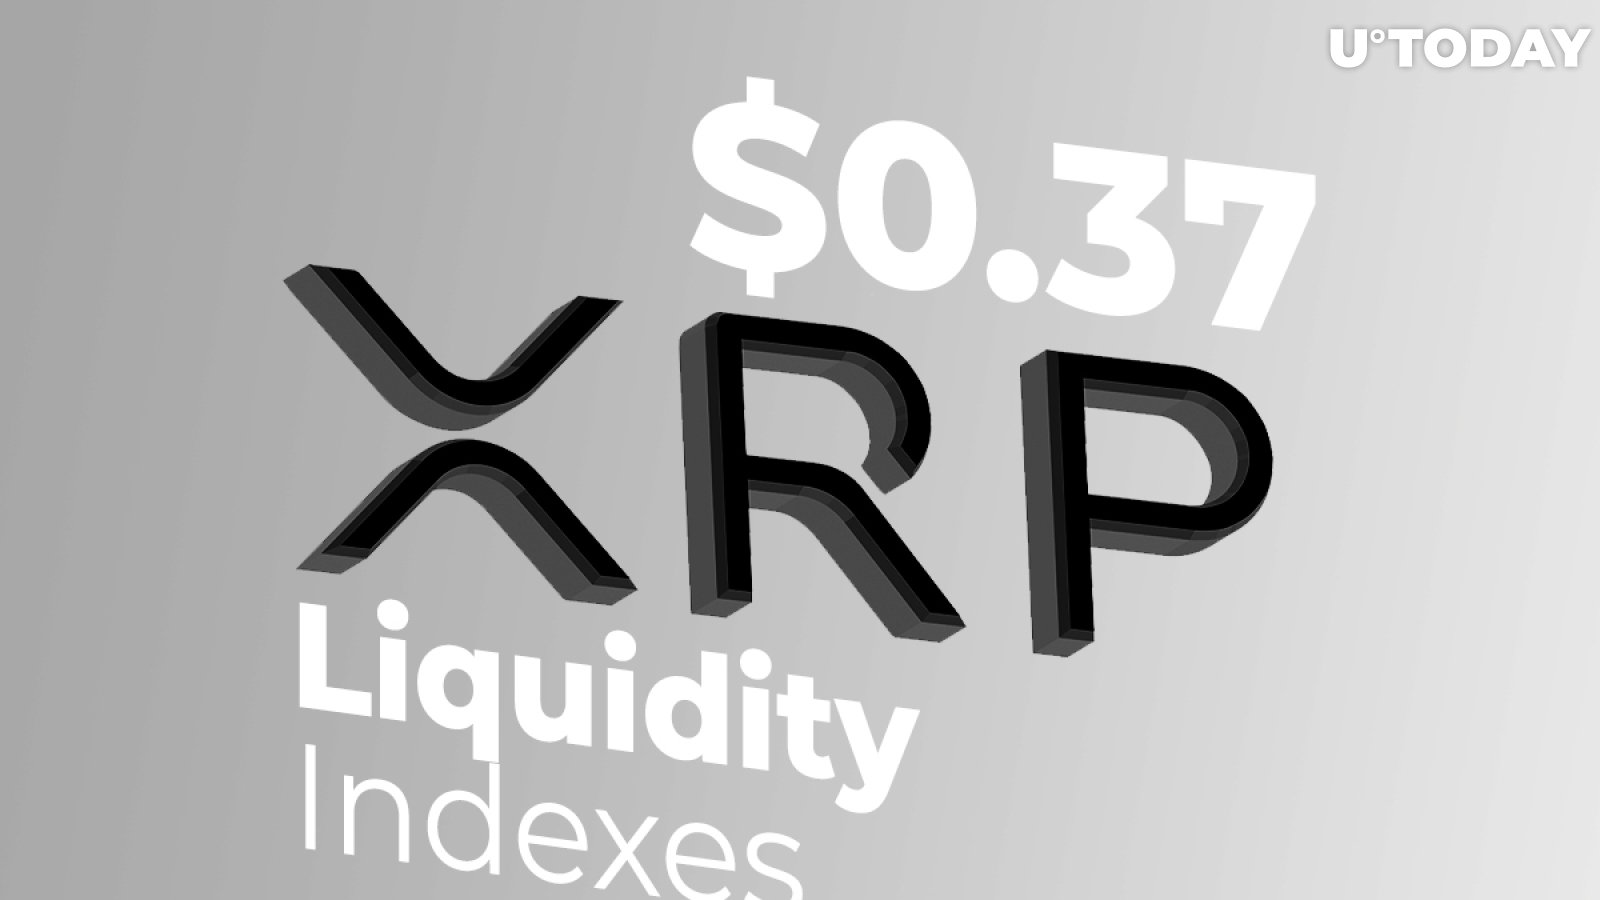 XRP Liquidity Indexes Surging as XRP Hits $0.37